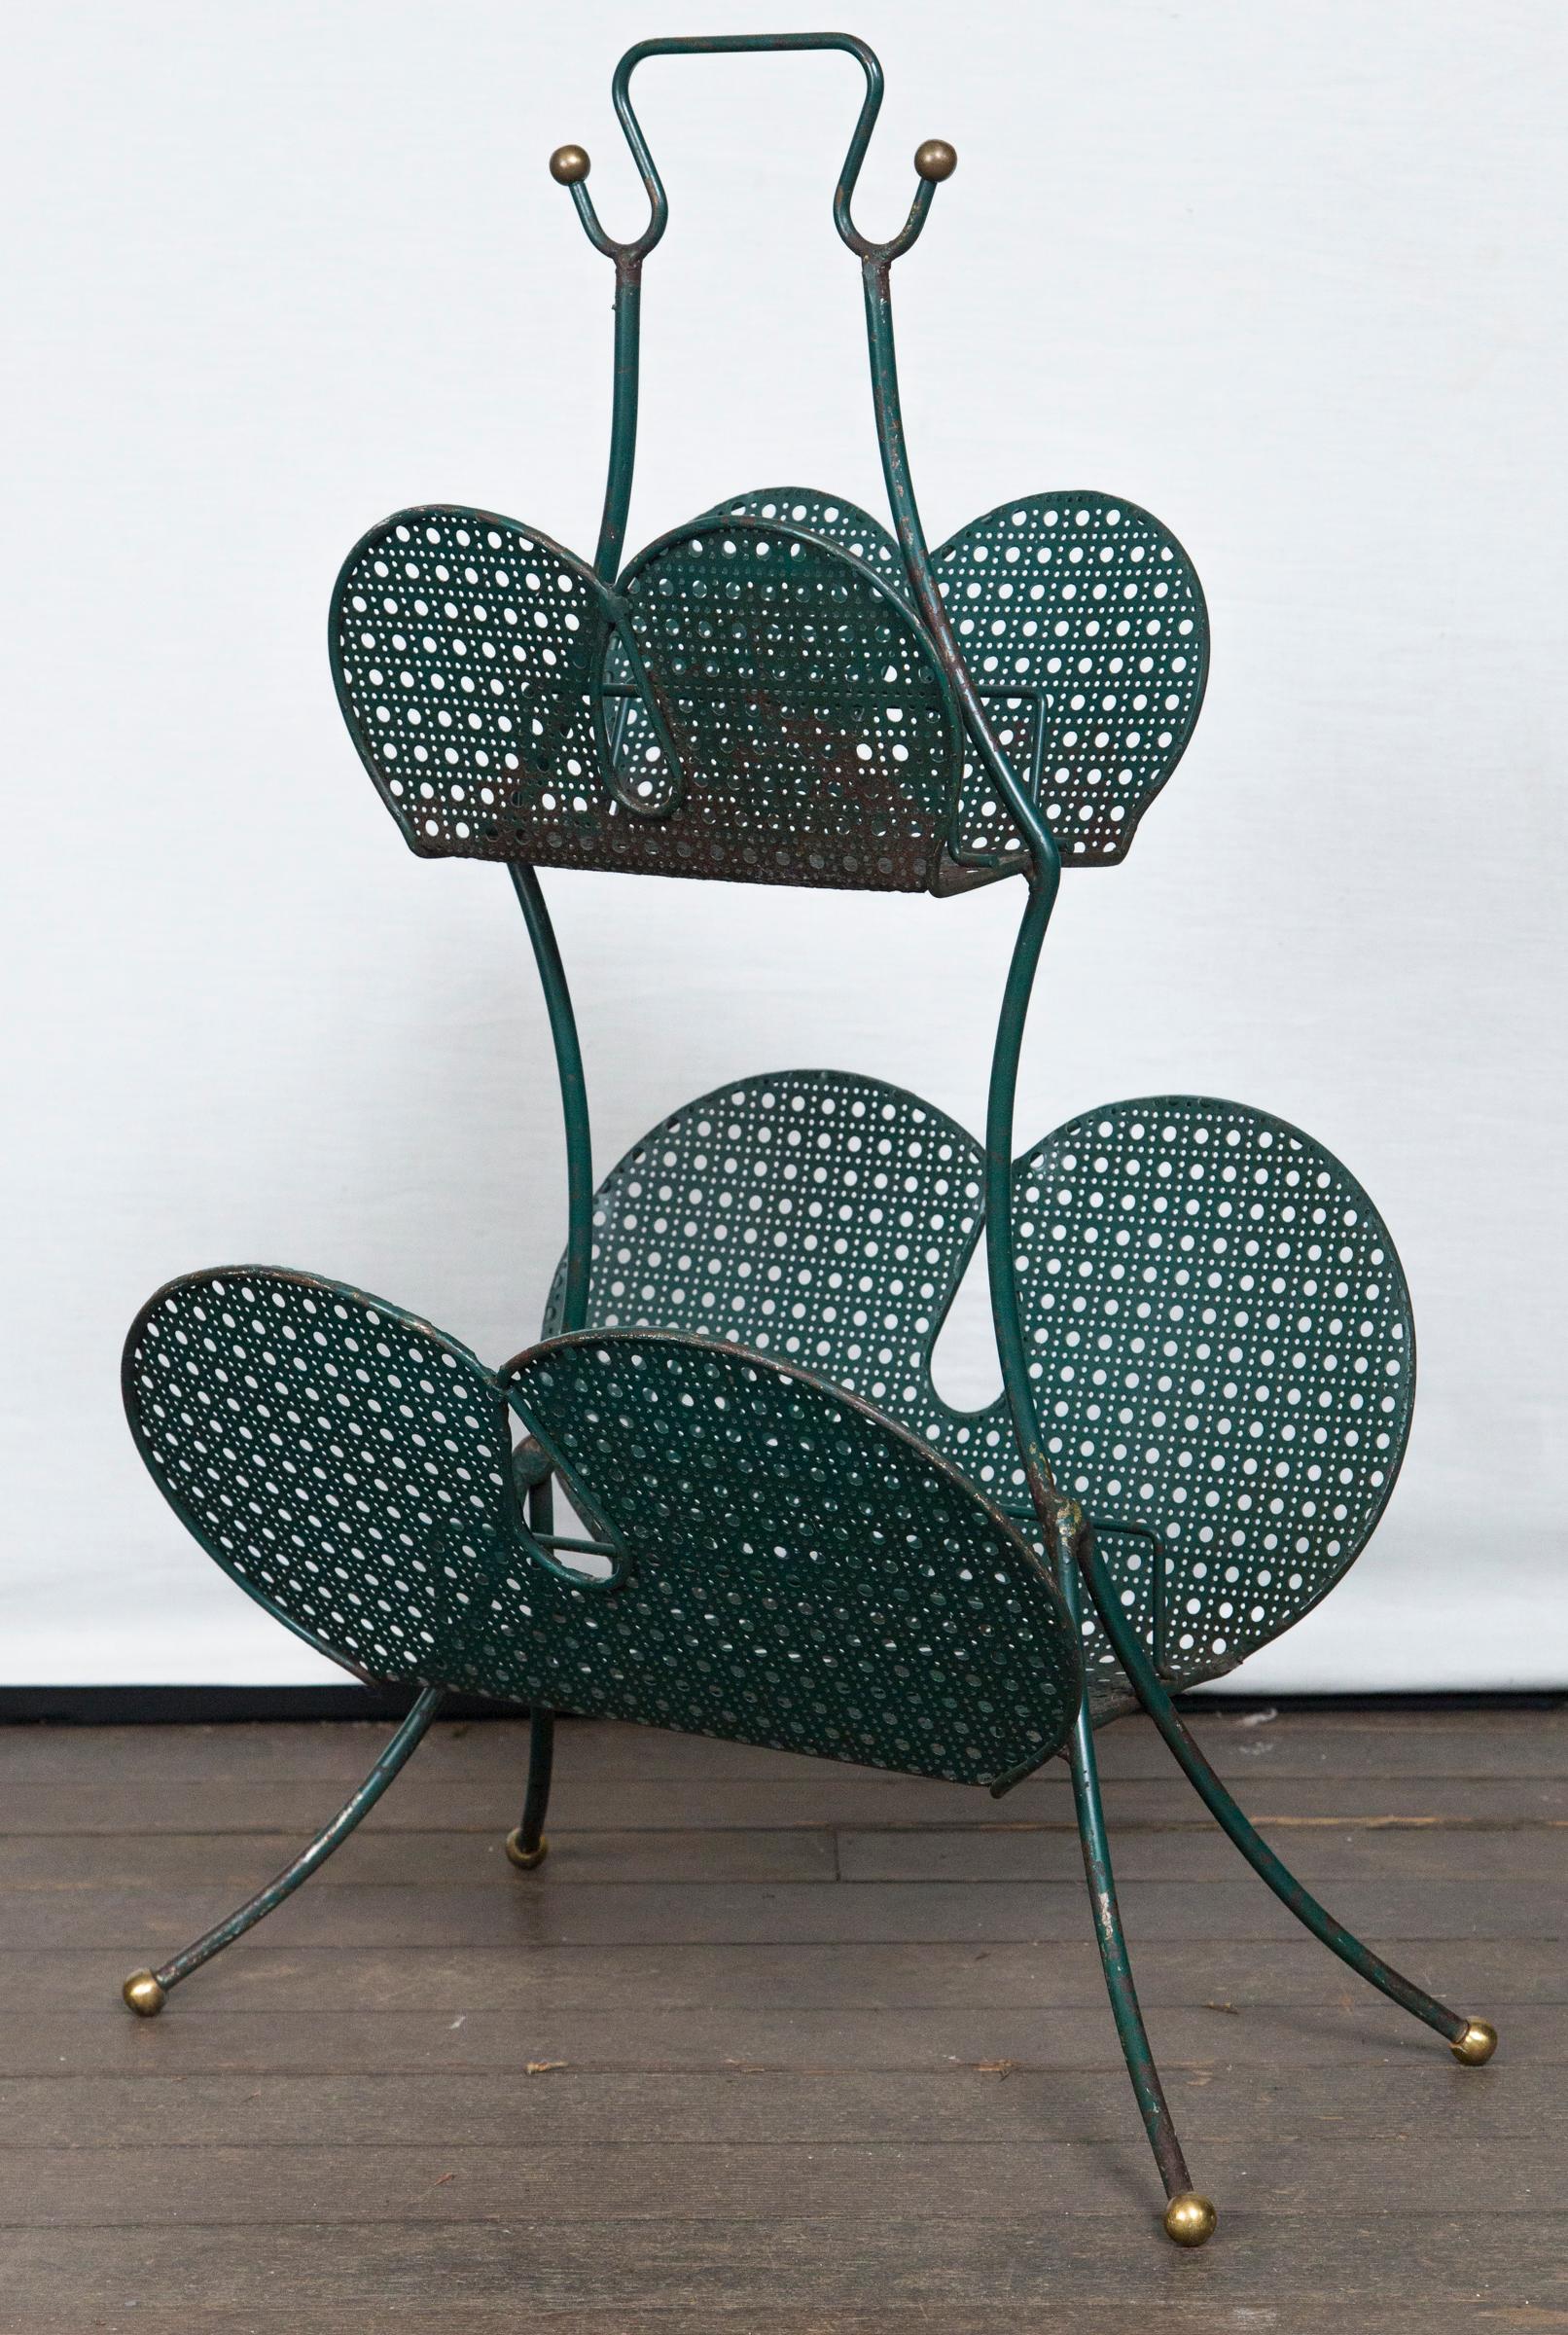 A French Matégot metal magazine rack which is both modern and whimsical from the 1950, perforated metal, metal, and brass.